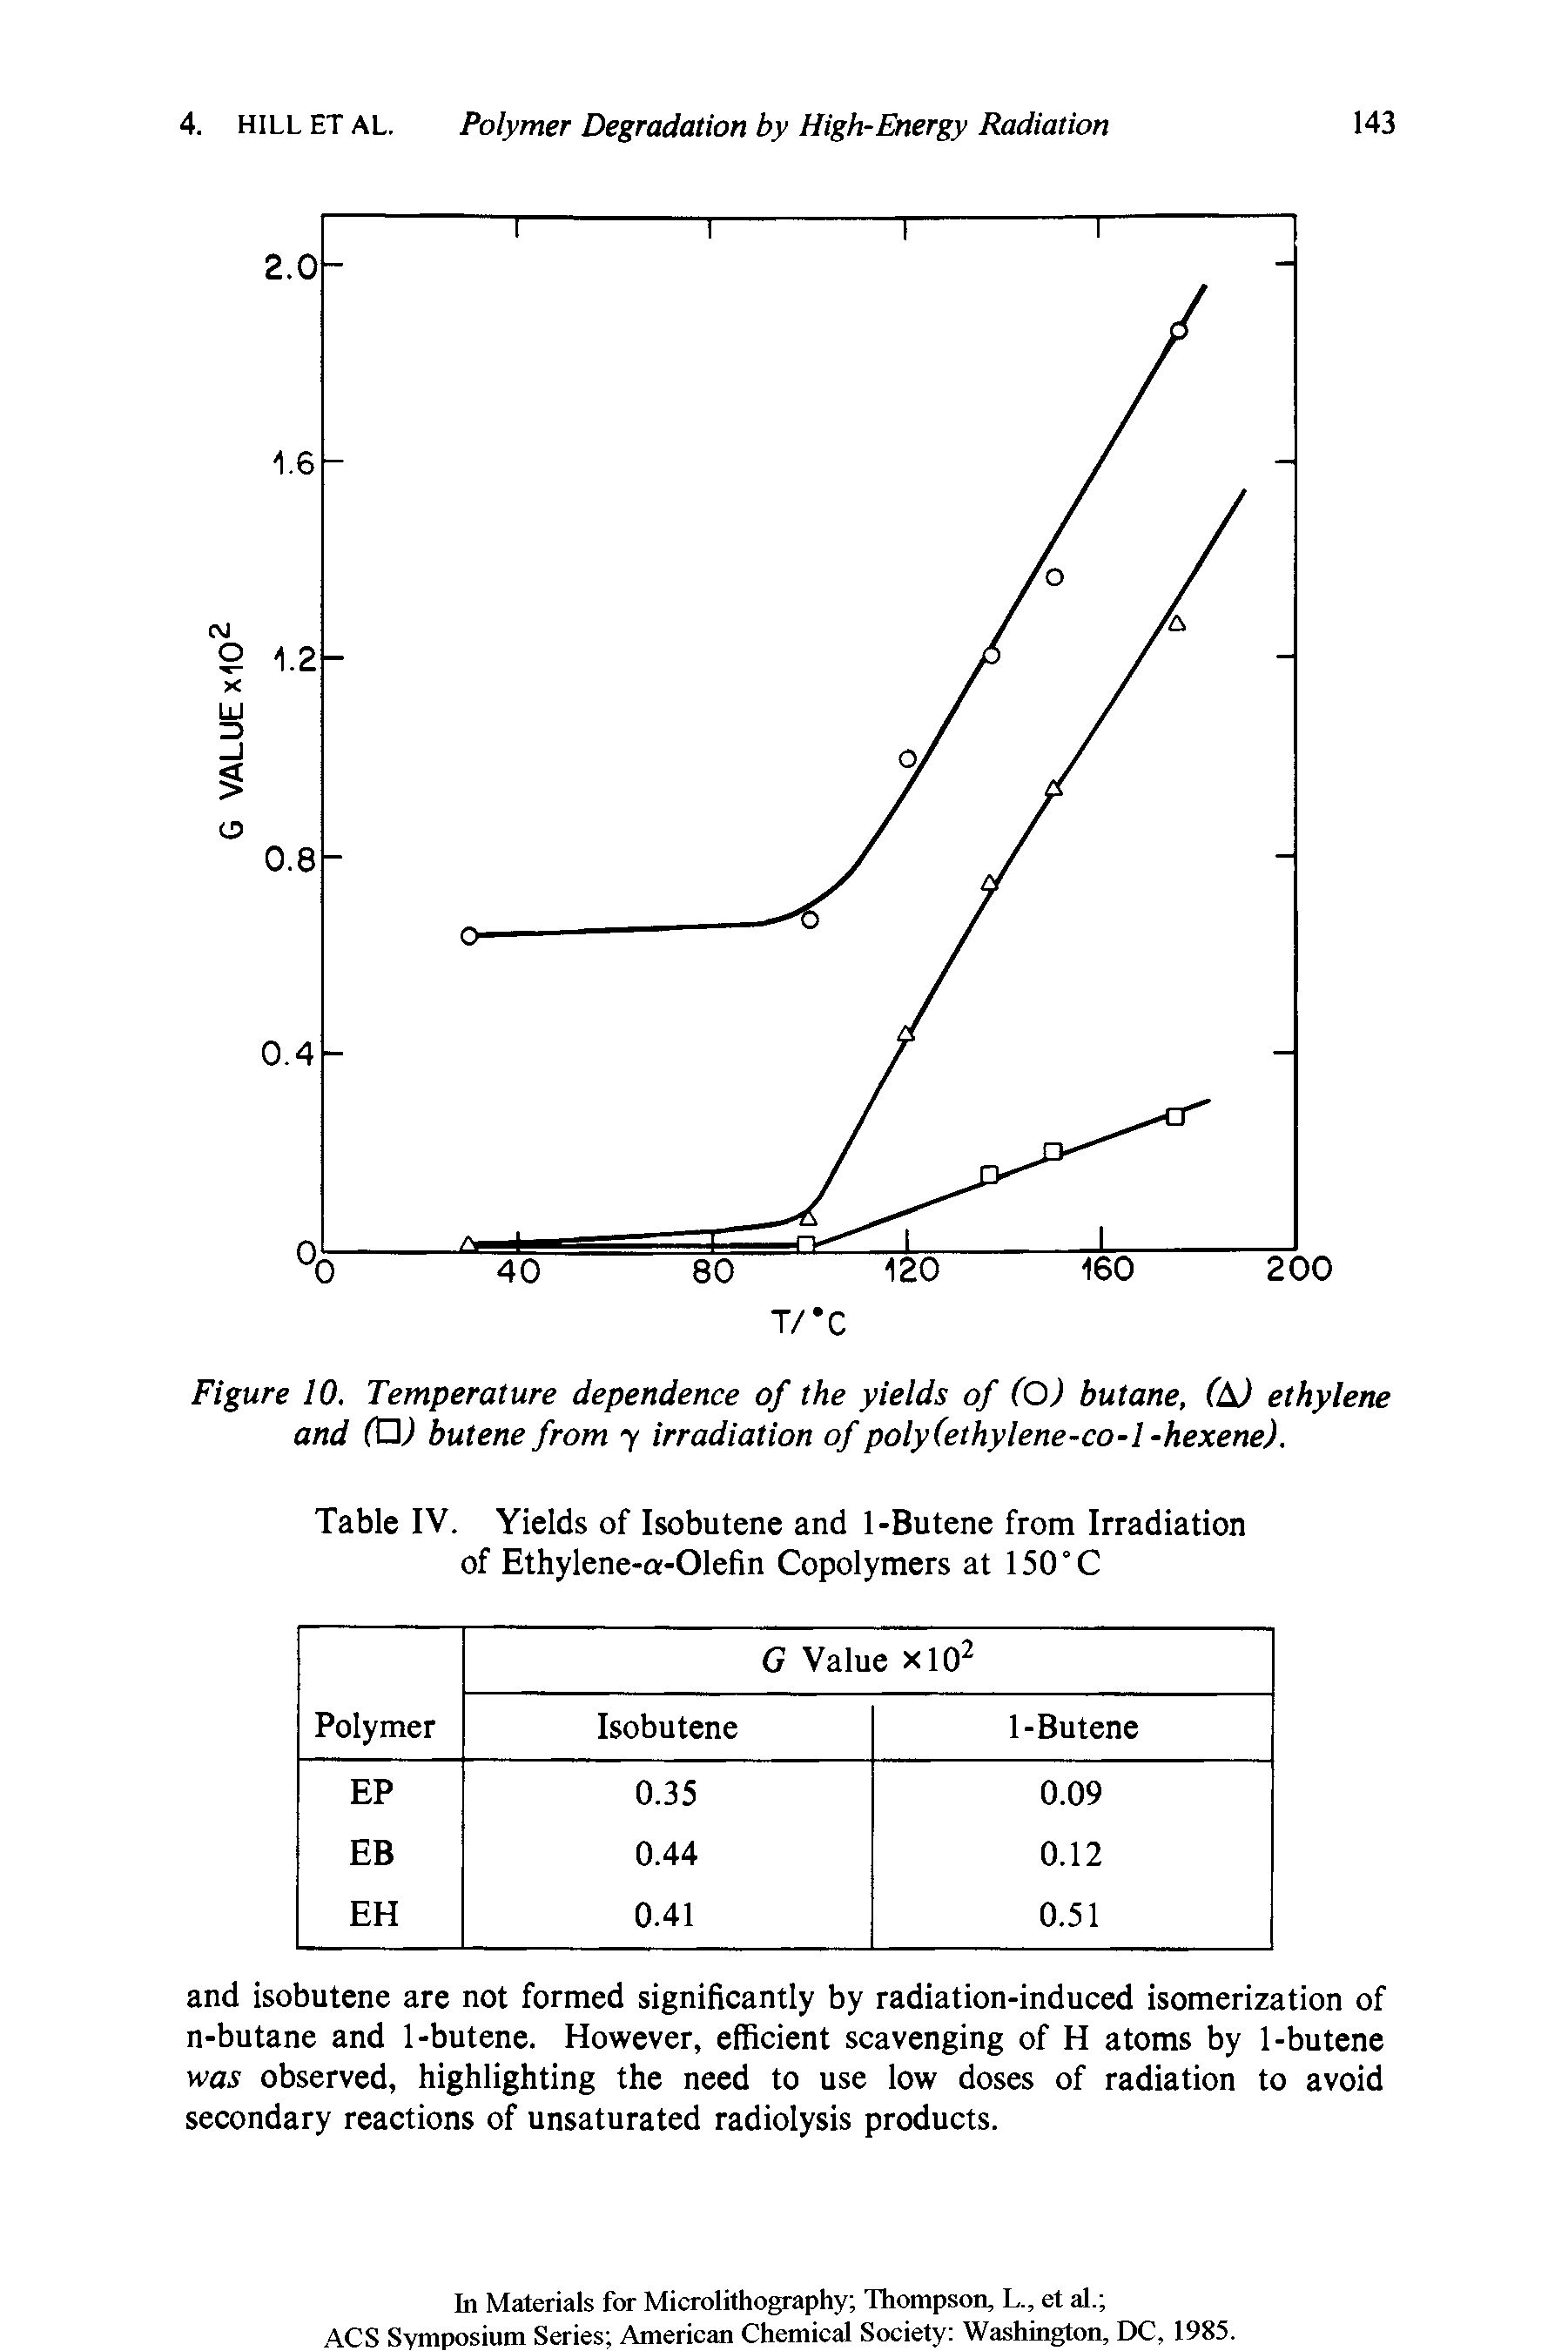 Table IV. Yields of Isobutene and 1-Butene from Irradiation of Ethylene-a-Olefin Copolymers at 150°C...